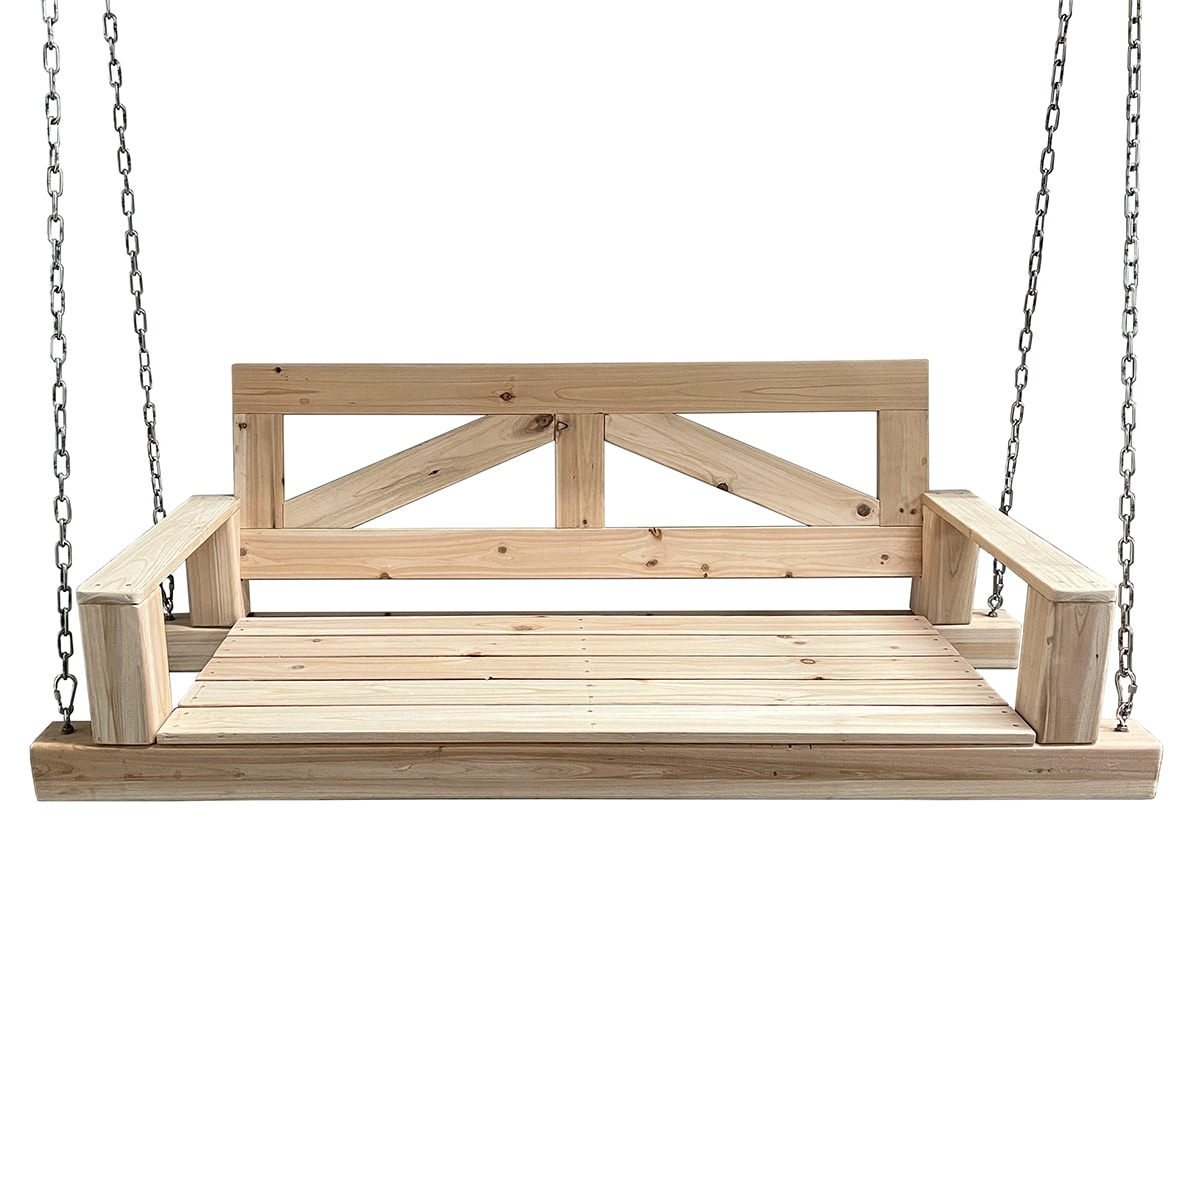 Barn-Shed-Play Black Replacement Porch Swing And Daybed Swing Bed